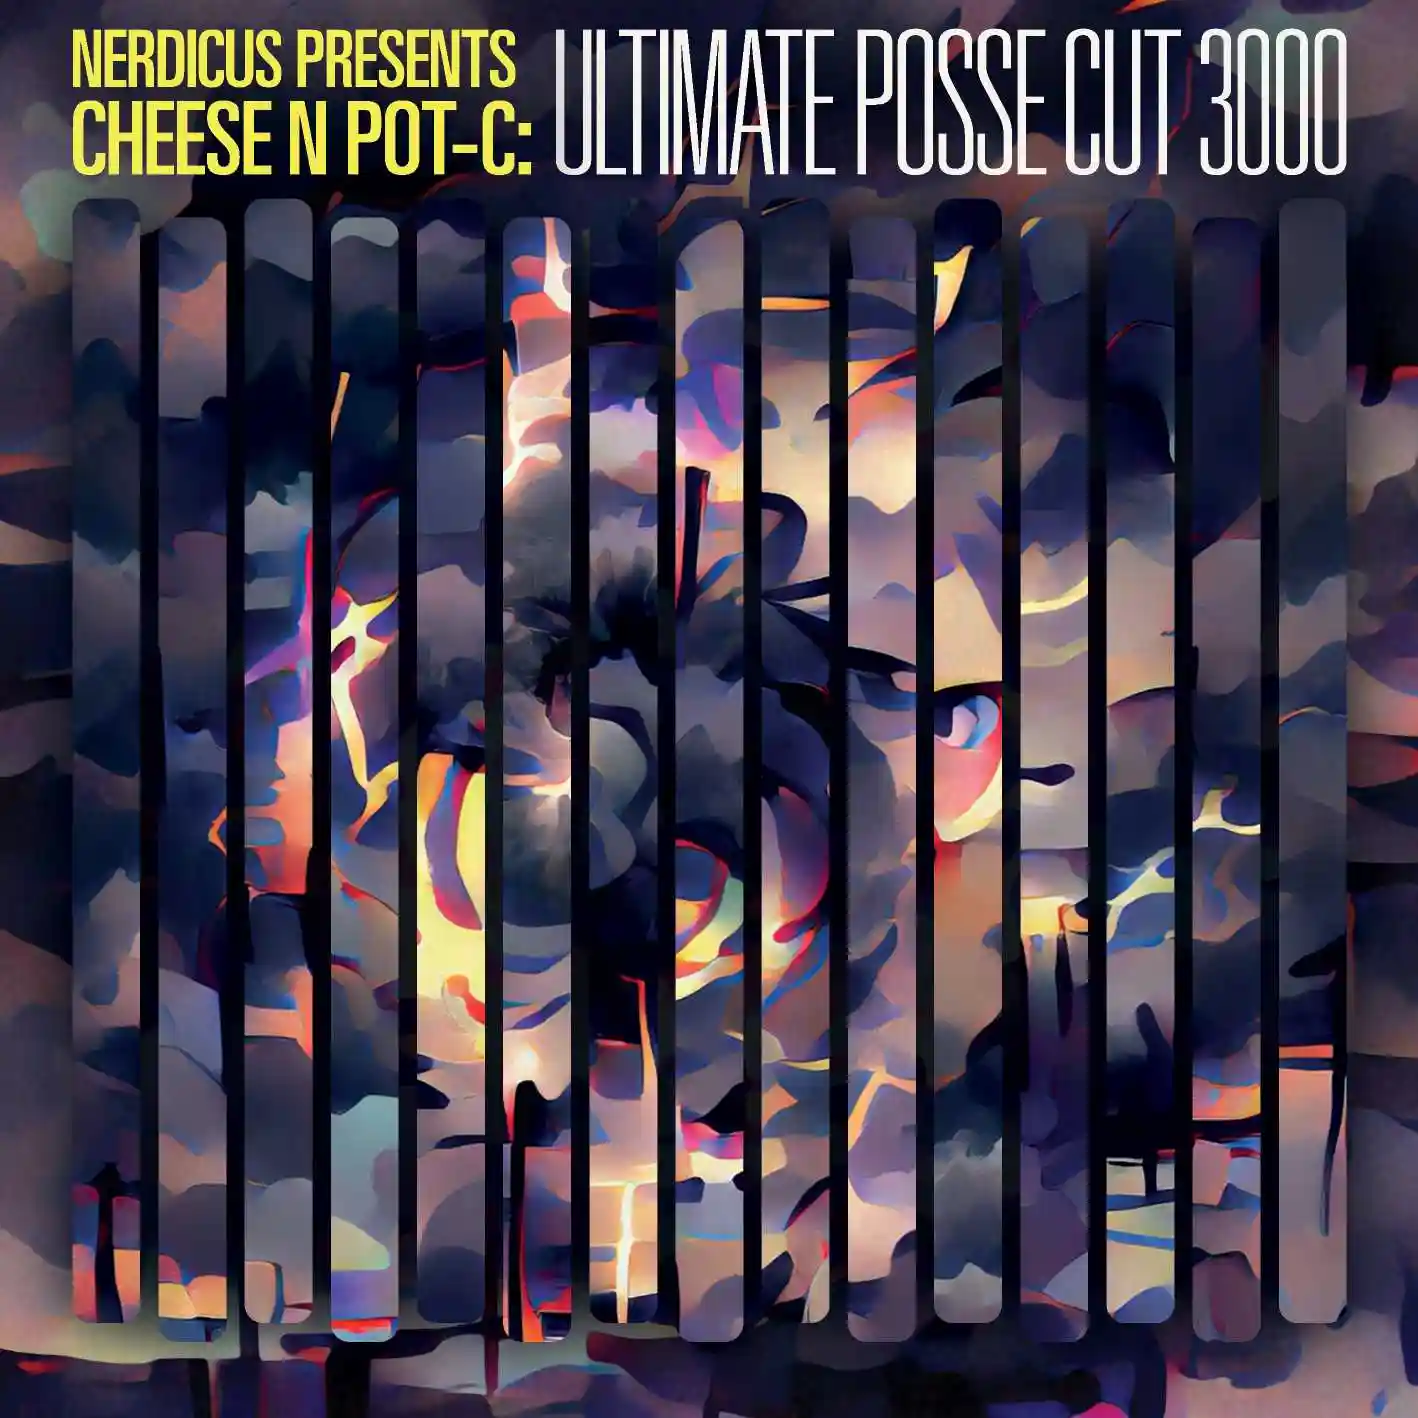 Album cover for “Nerdicus Presents Cheese N Pot-C: Ultimate Posse Cut 3000” by Cheese N Pot-C